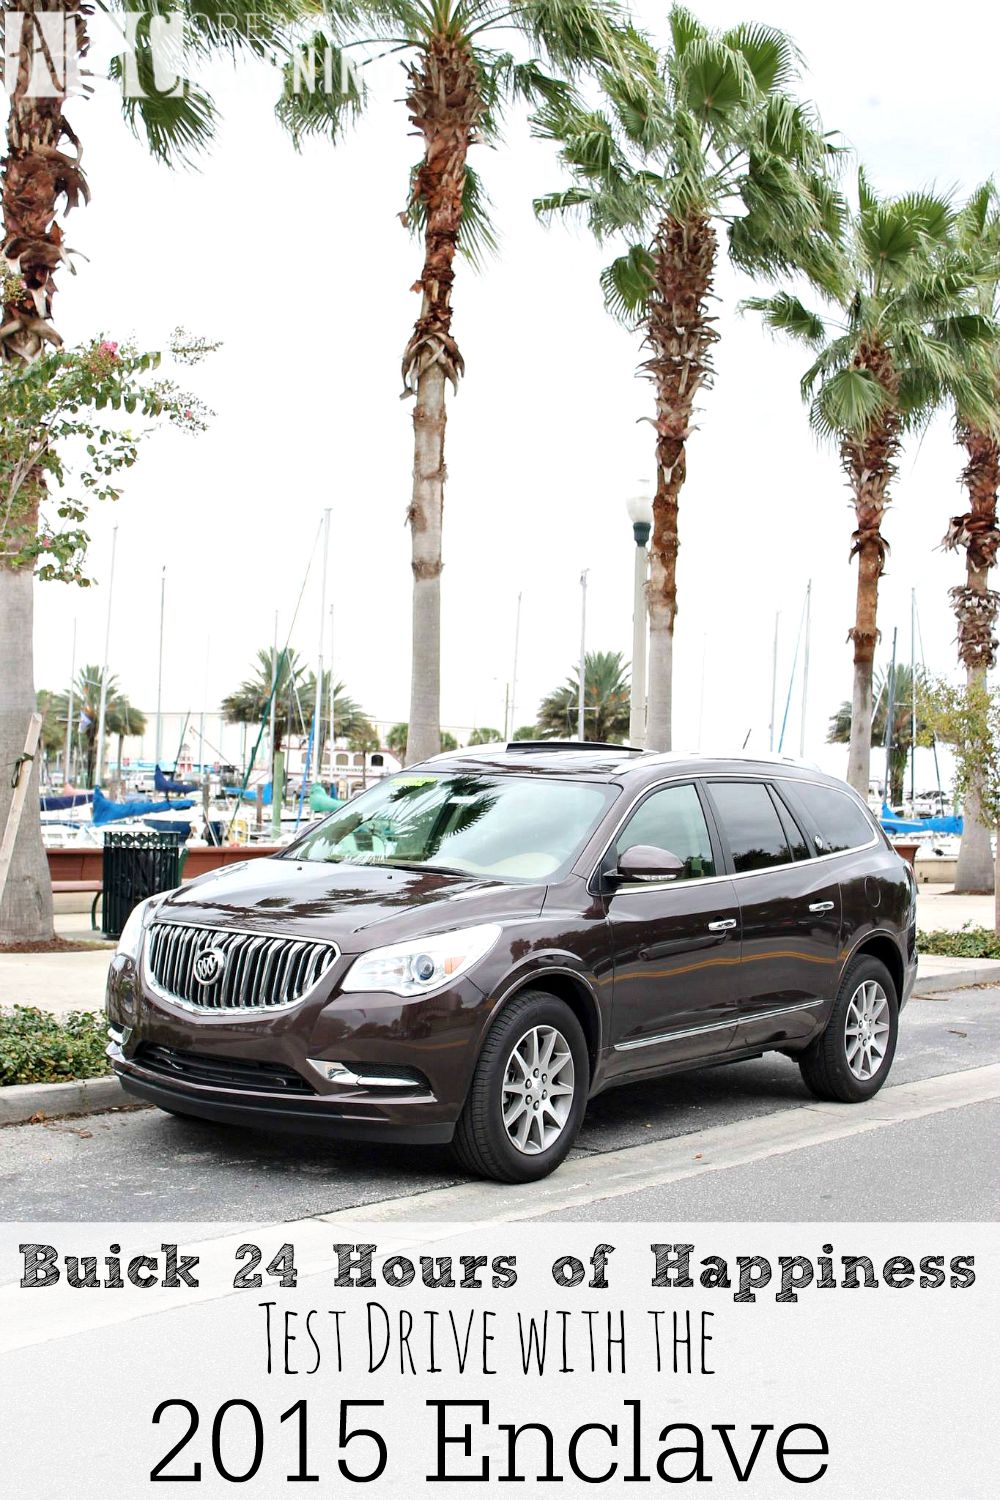 Buick 24 Hours of Happiness Test Drive with the 2015 Enclave